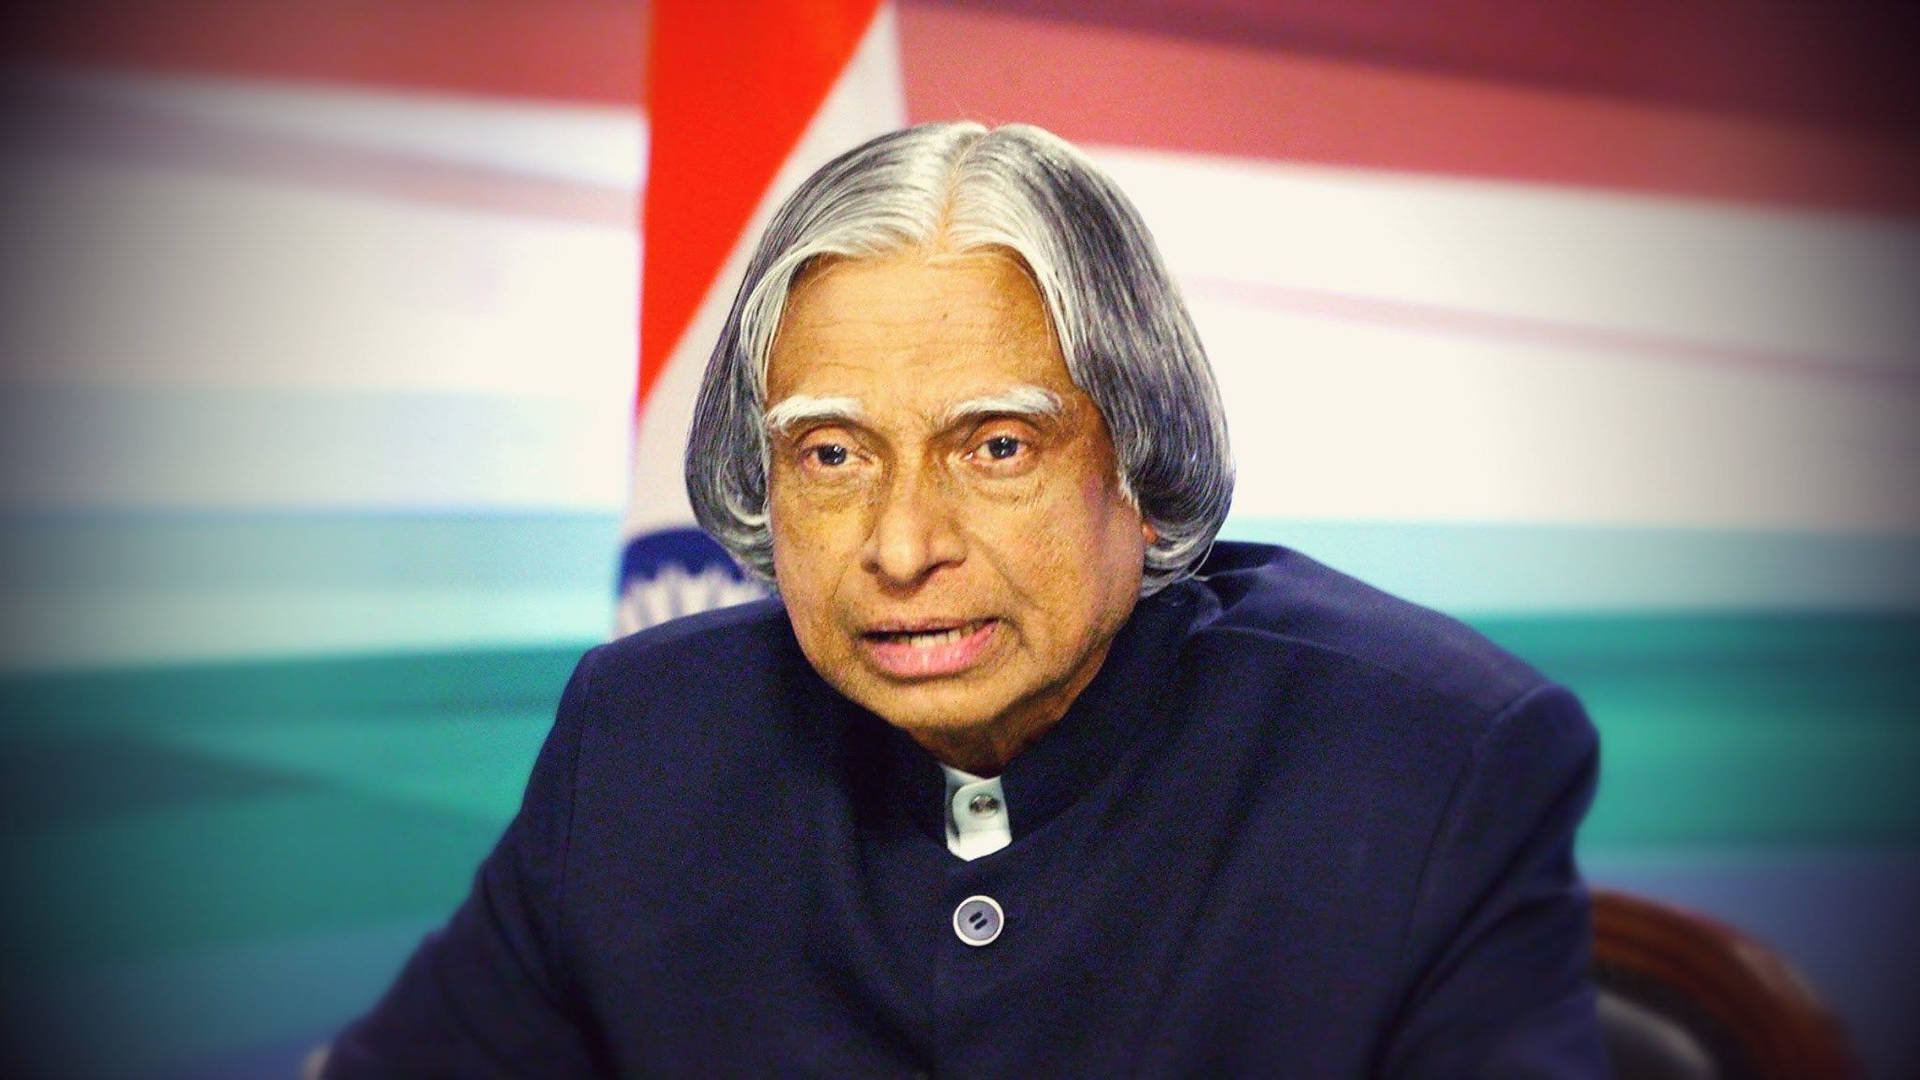 Abdul Kalam Hd 11th Indian President Background